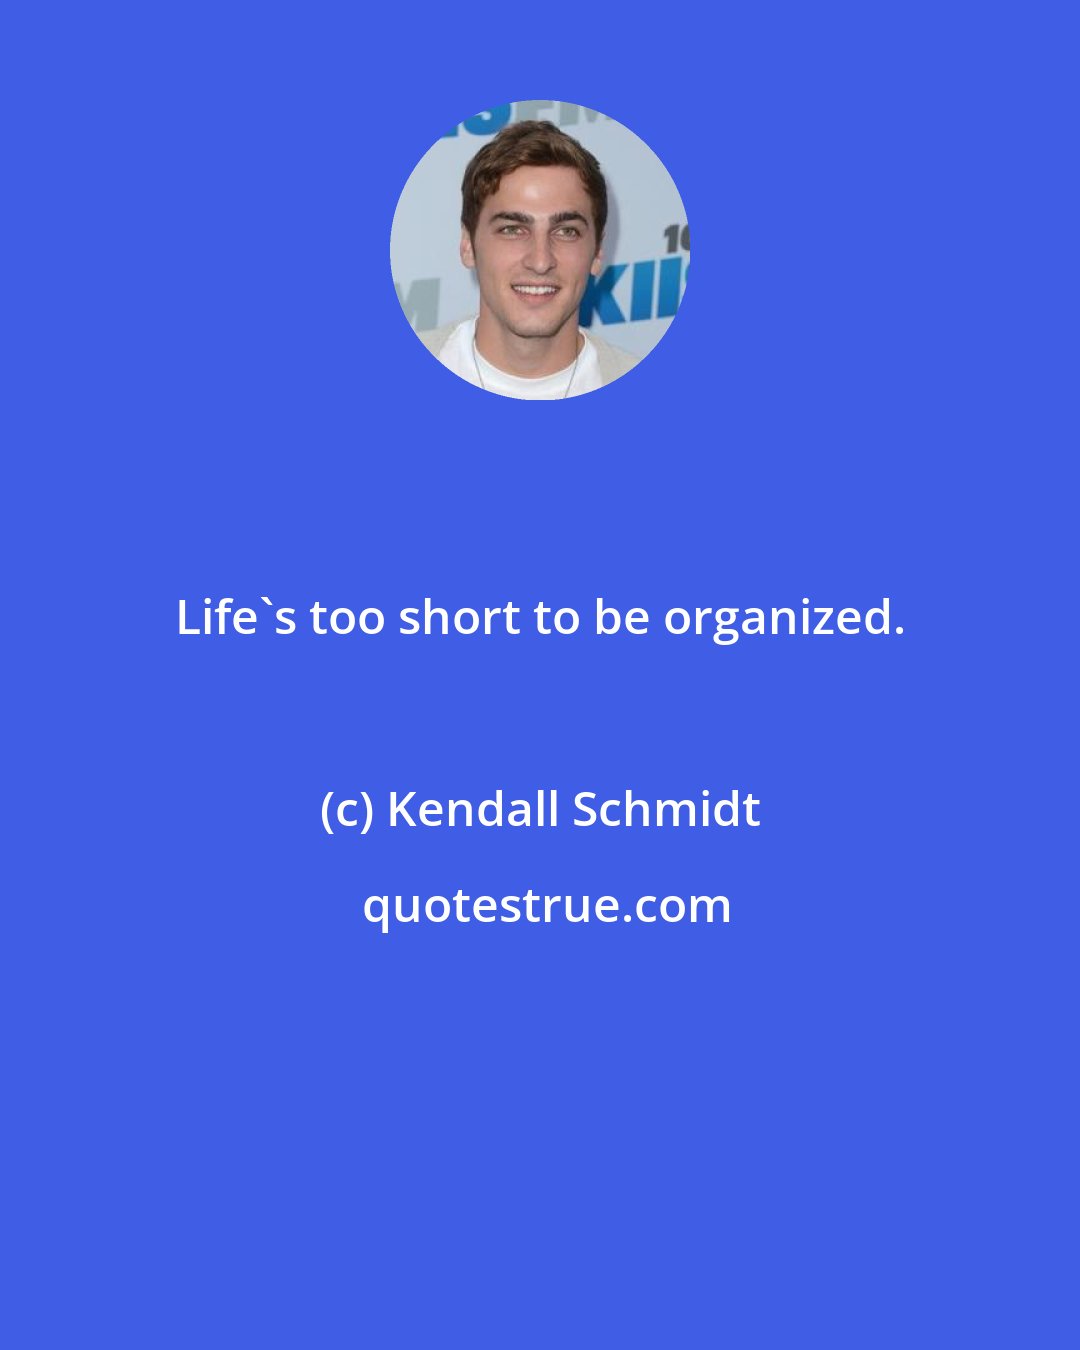 Kendall Schmidt: Life's too short to be organized.